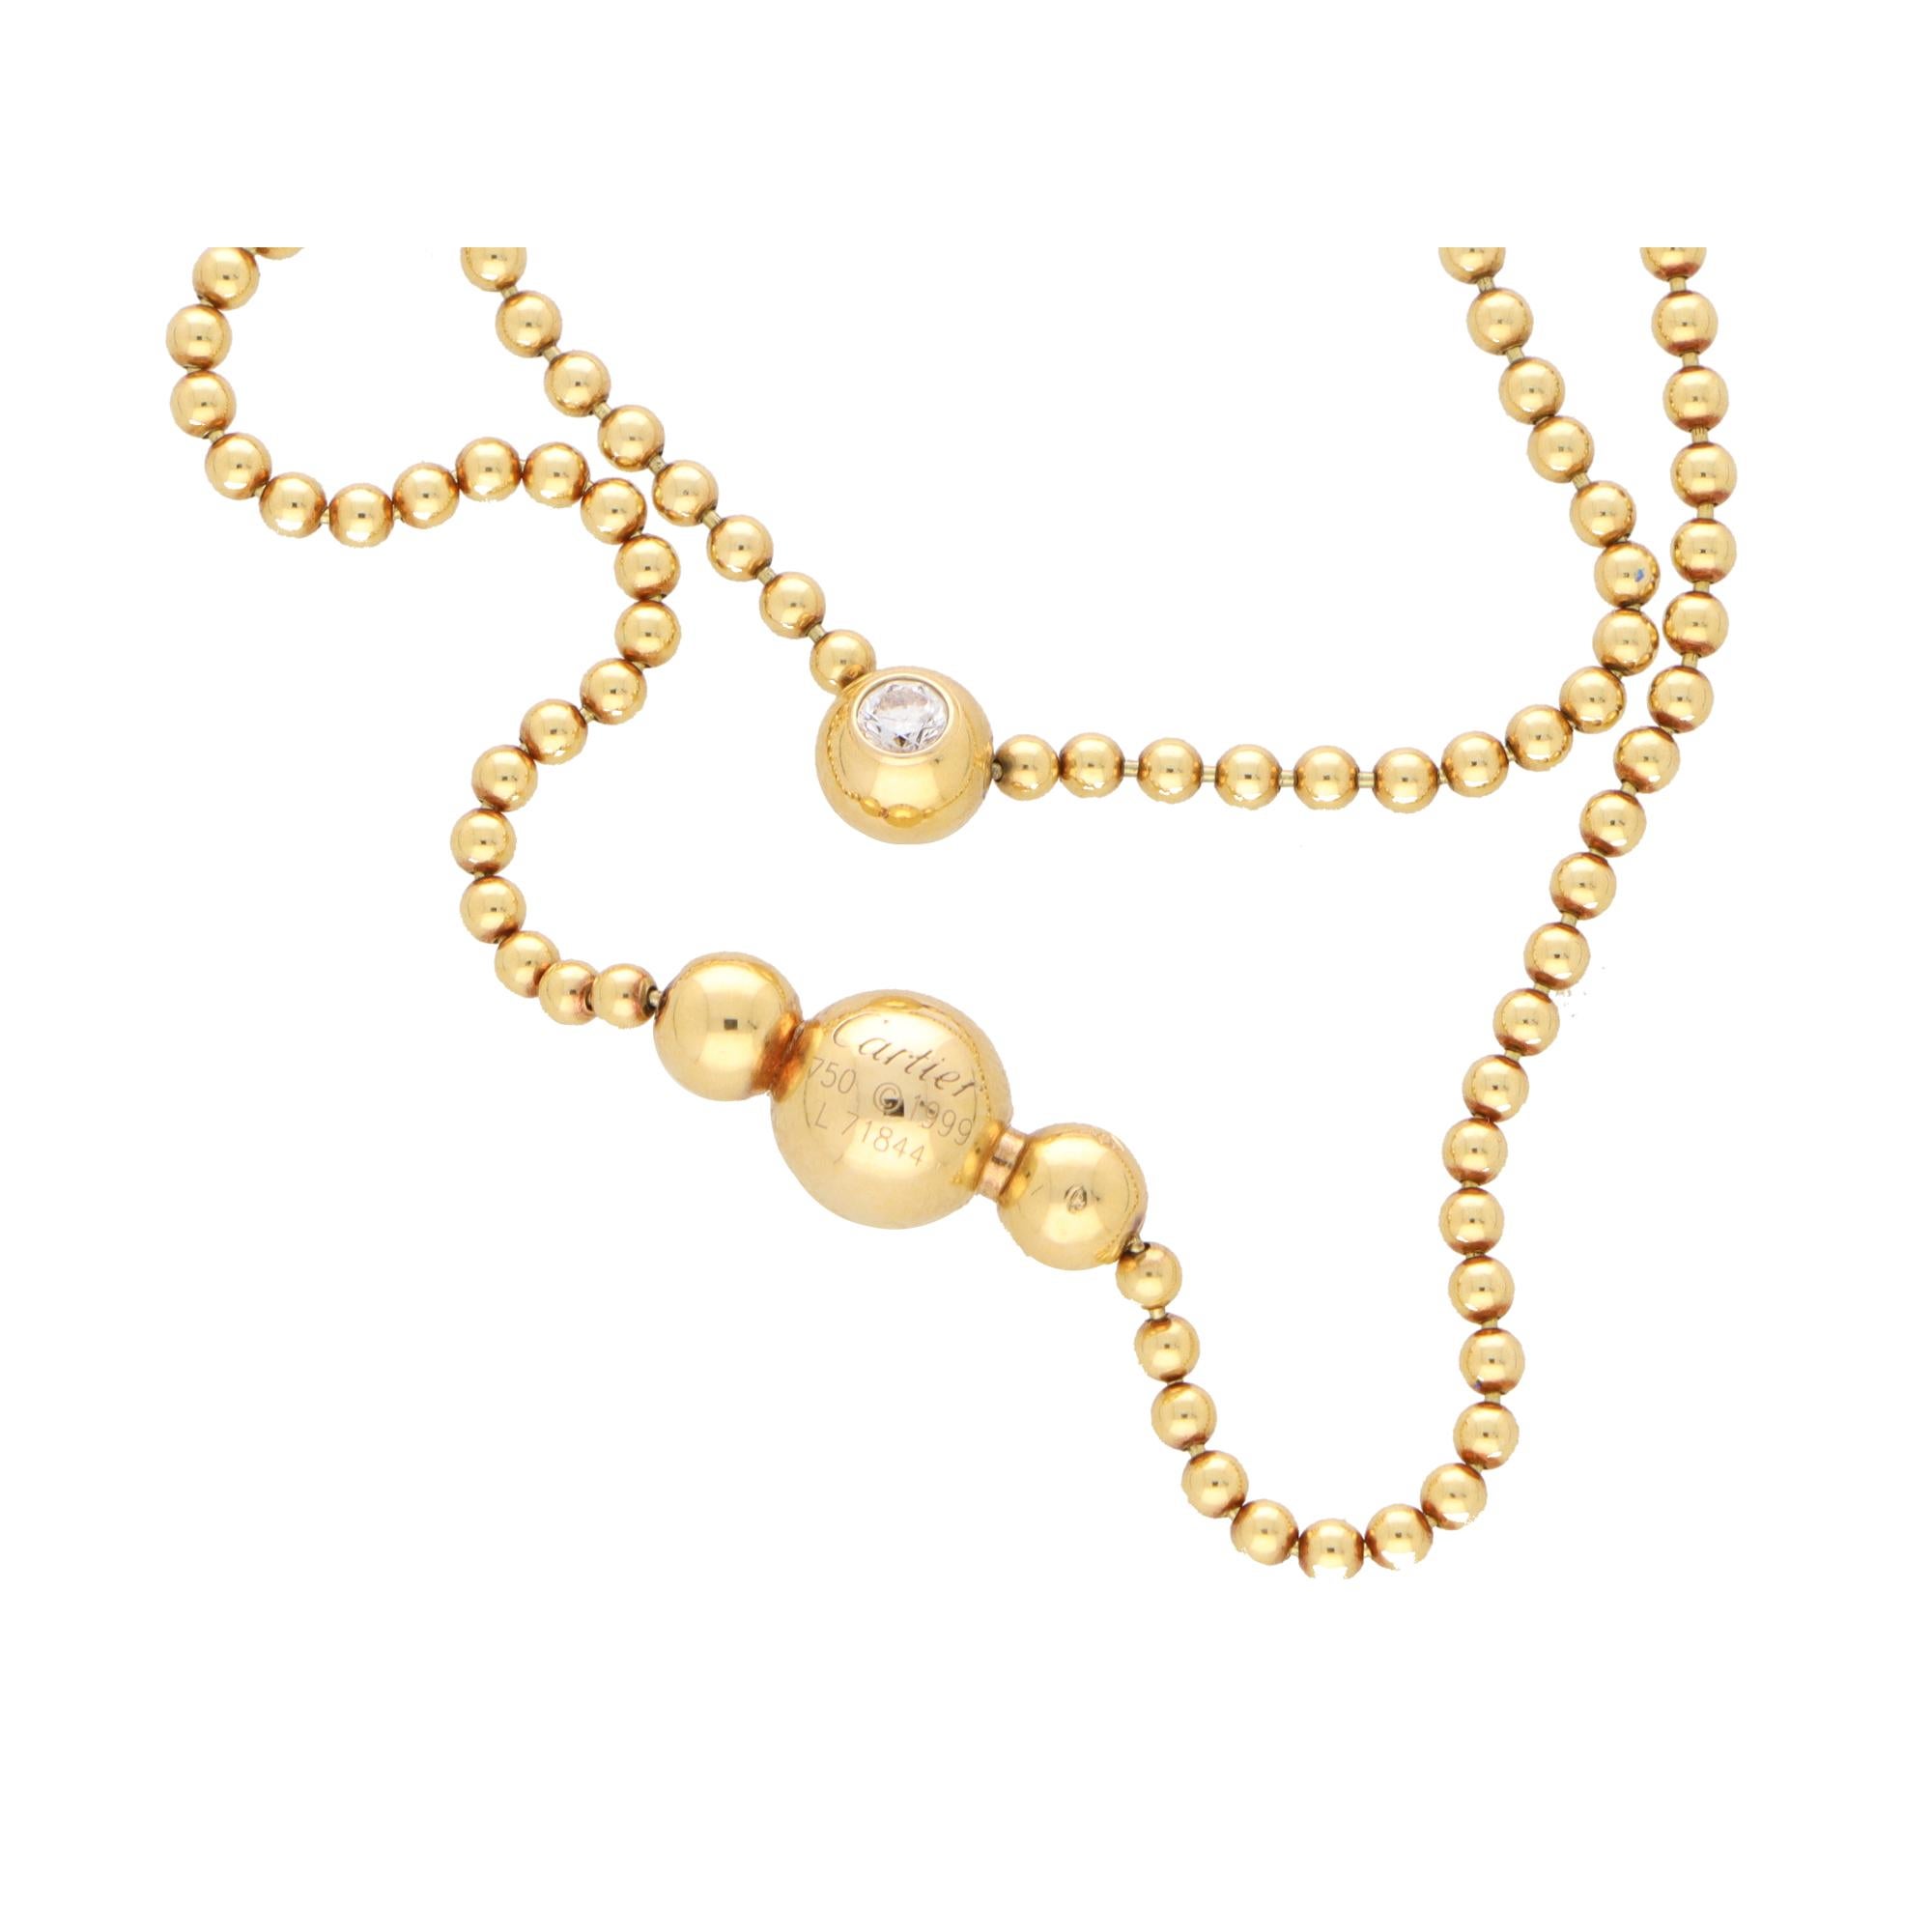  A beautiful vintage Cartier 'Perles De Diamant' solitaire pendant necklace set in 18k yellow.

From the now discontinued 'Perles De Diamant' collection the necklace is predominantly composed of a 0.18 carat diamond, rub over set this bubble/pearl